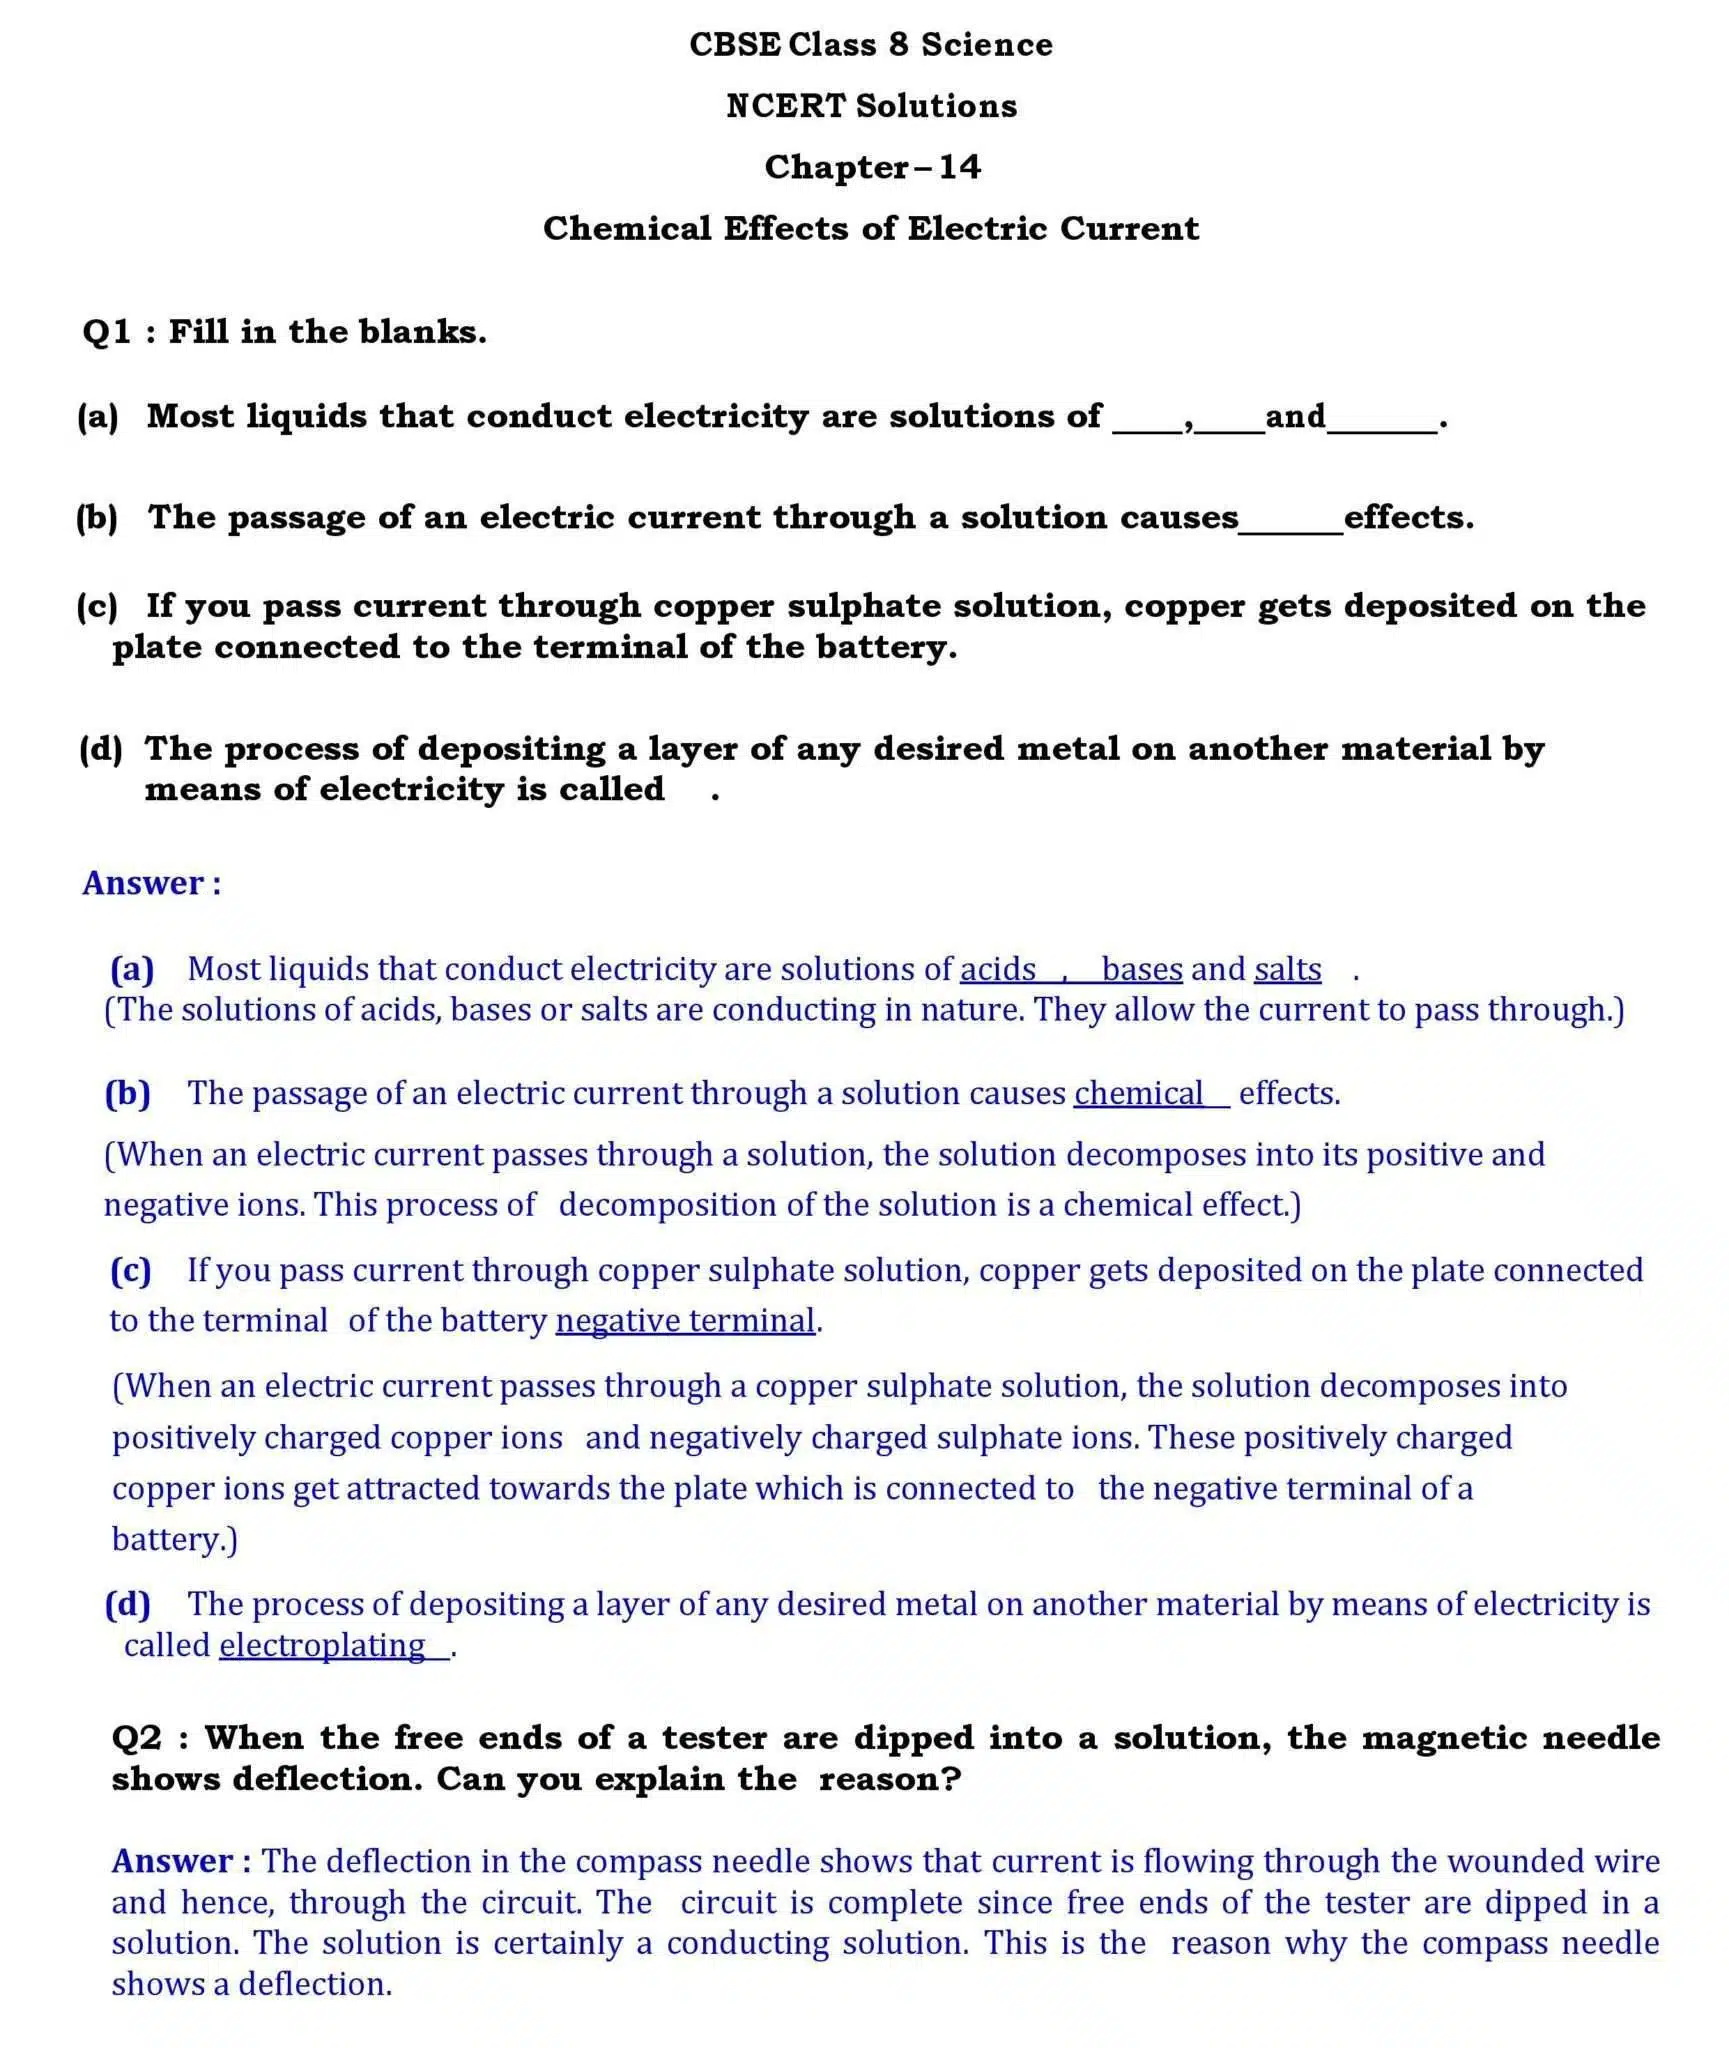 NCERT Solutions for Class 8 Science Chapter 14 page 001